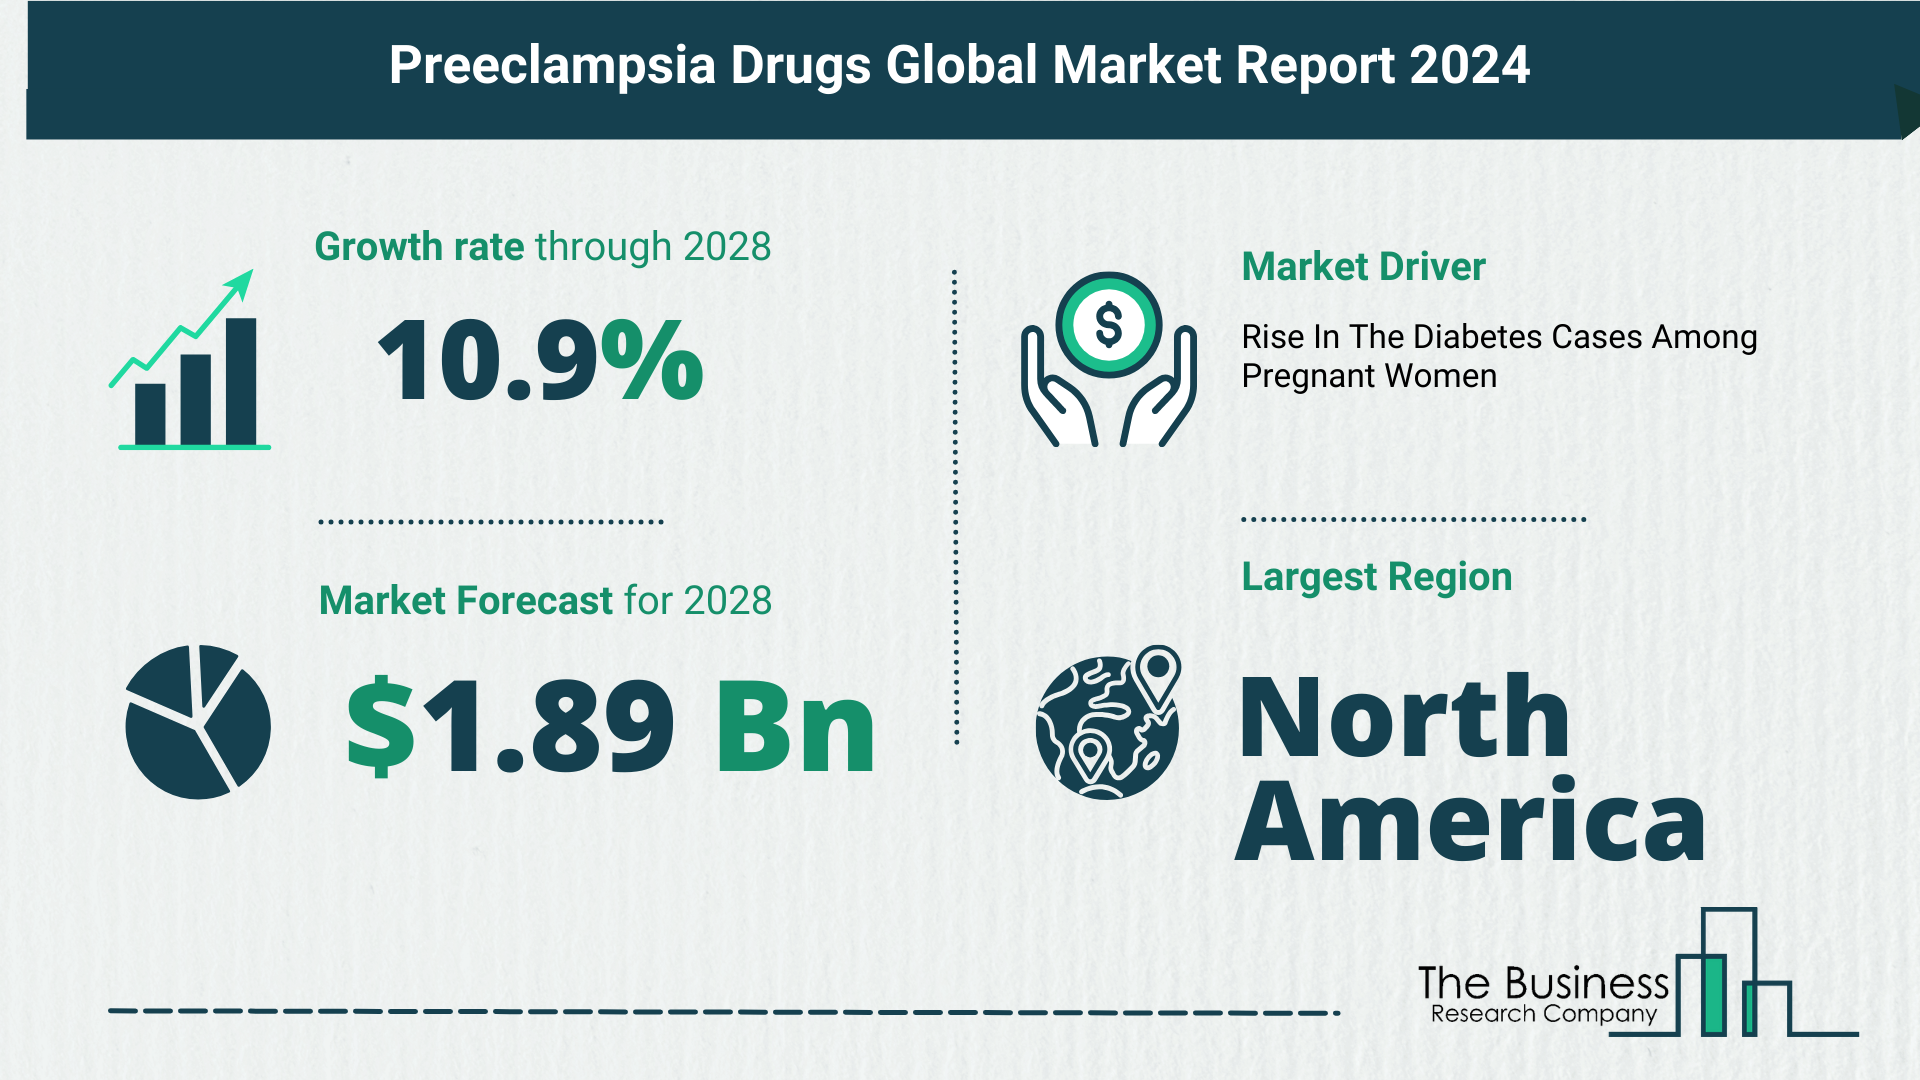 How Is The Preeclampsia Drugs Market Expected To Grow Through 2024-2033